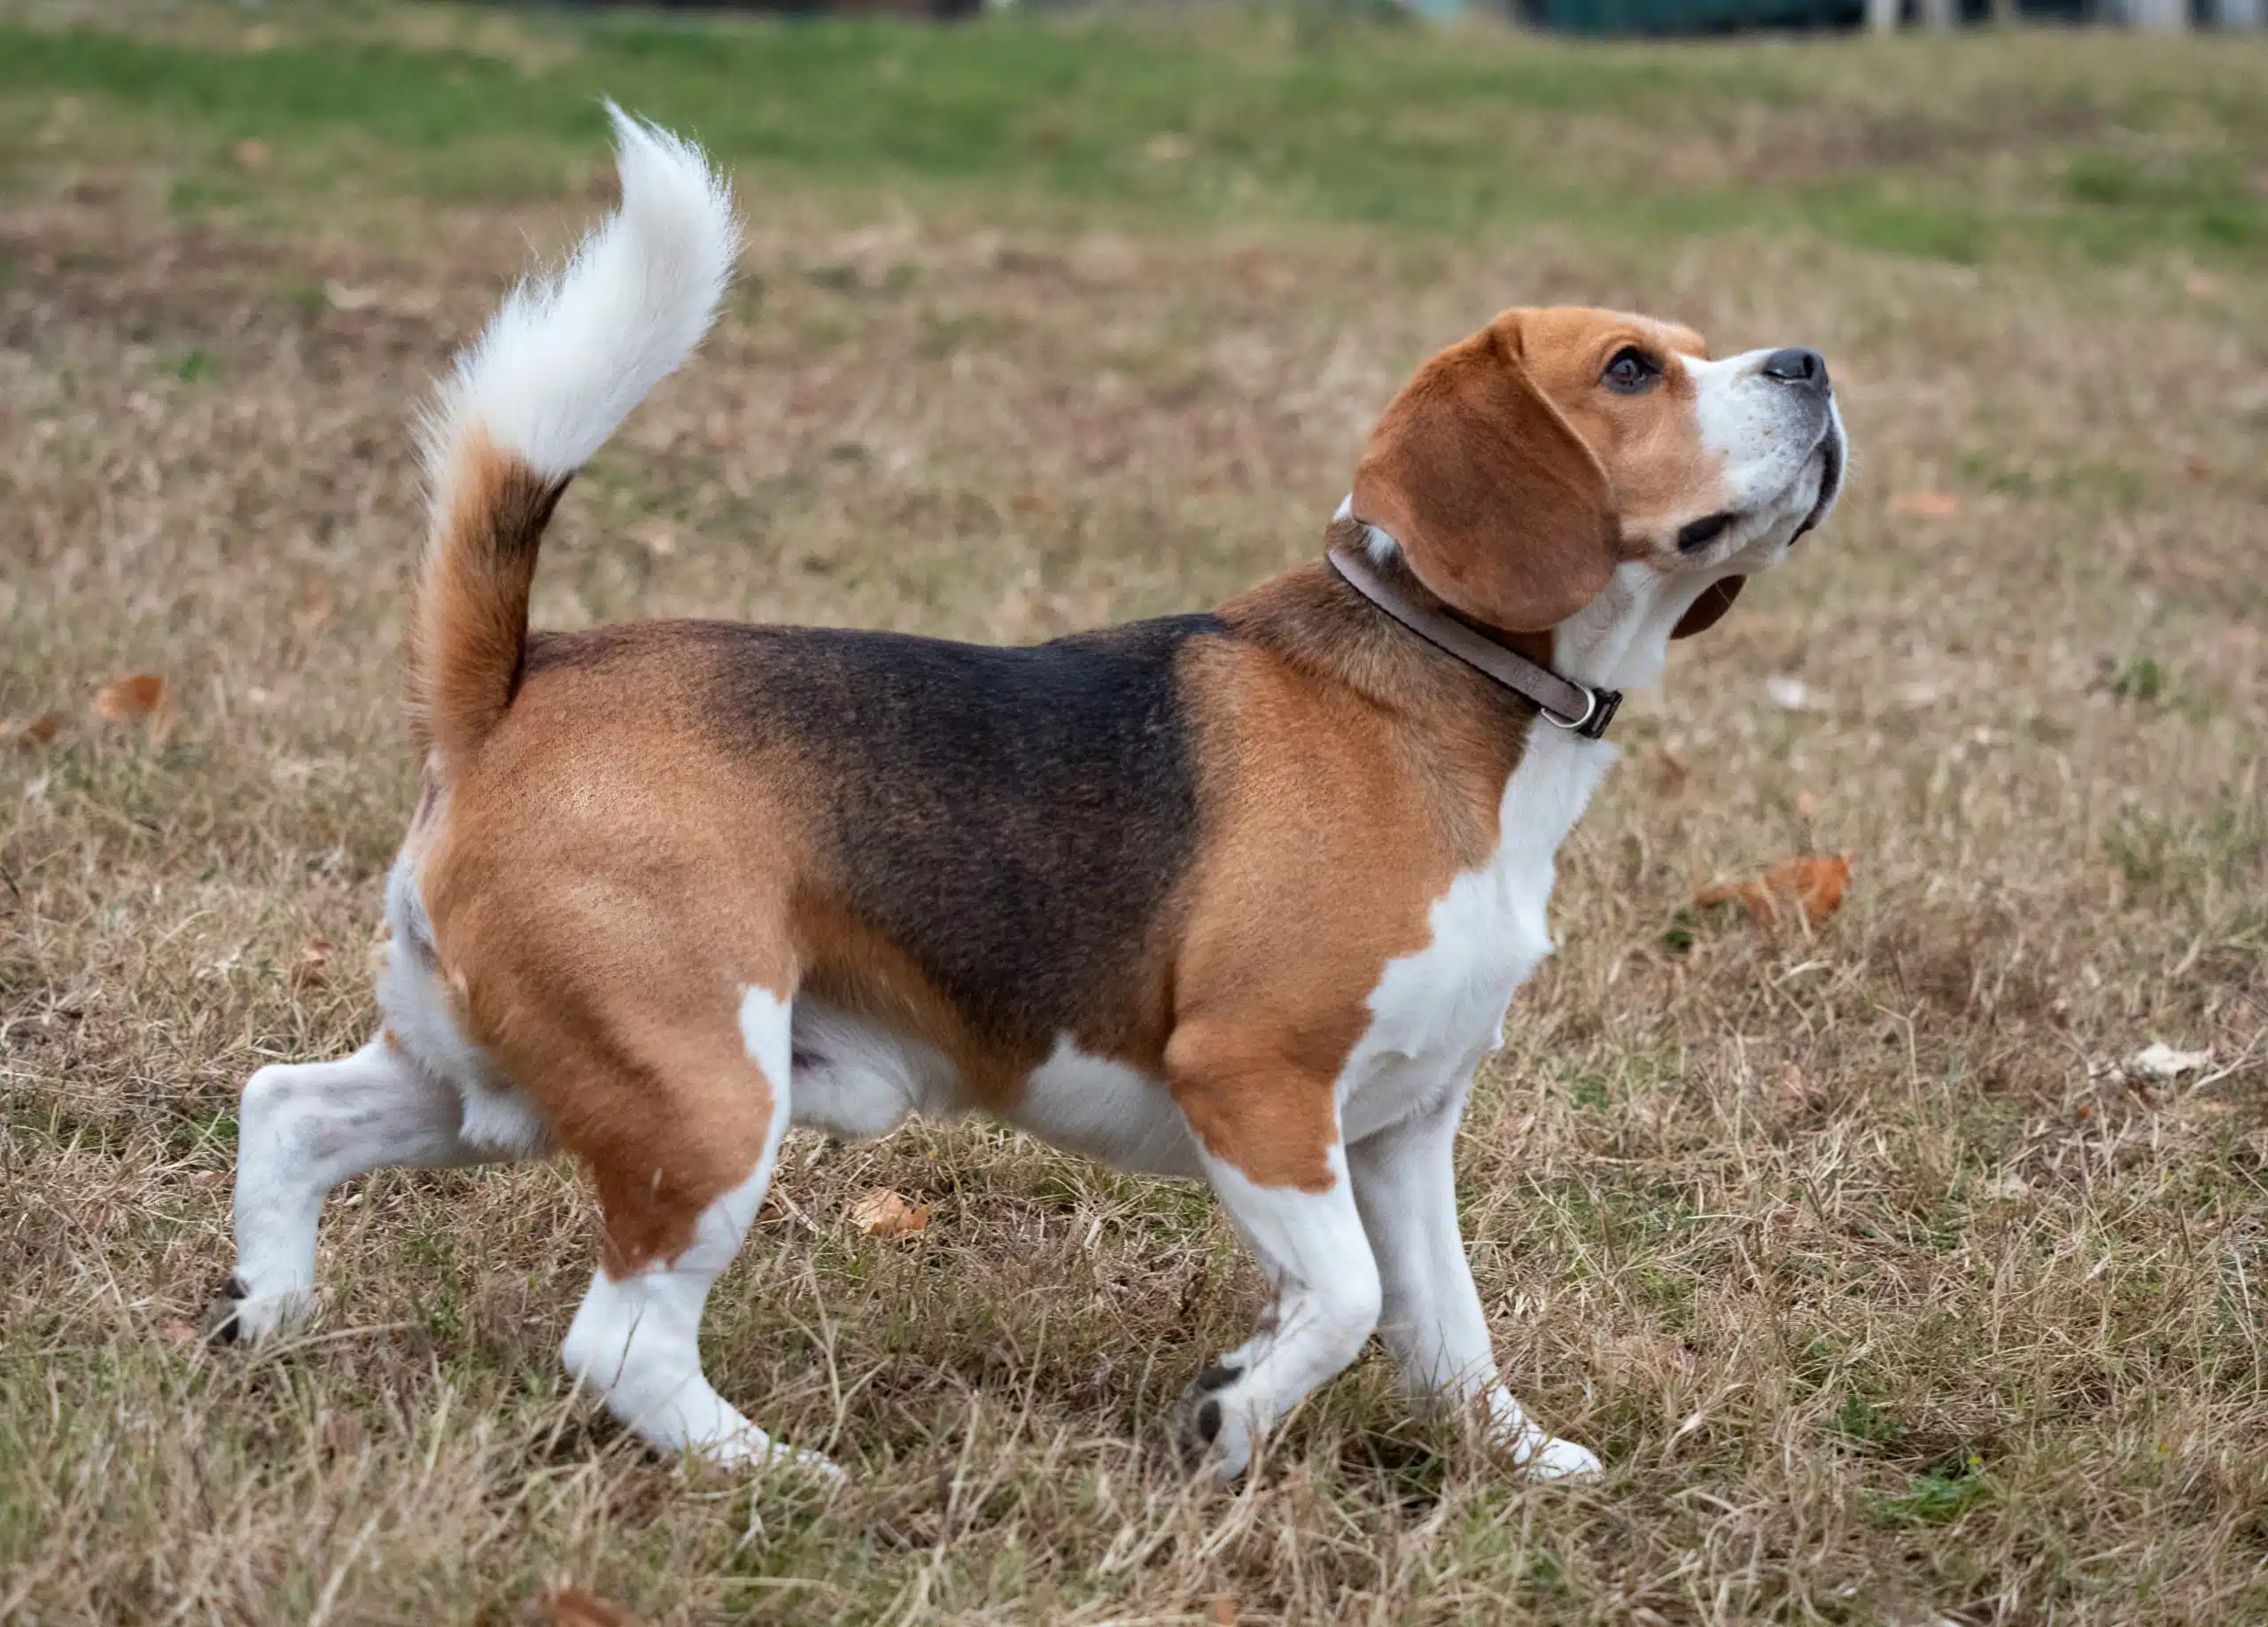 Beagle dogs are prone to epilepsy.